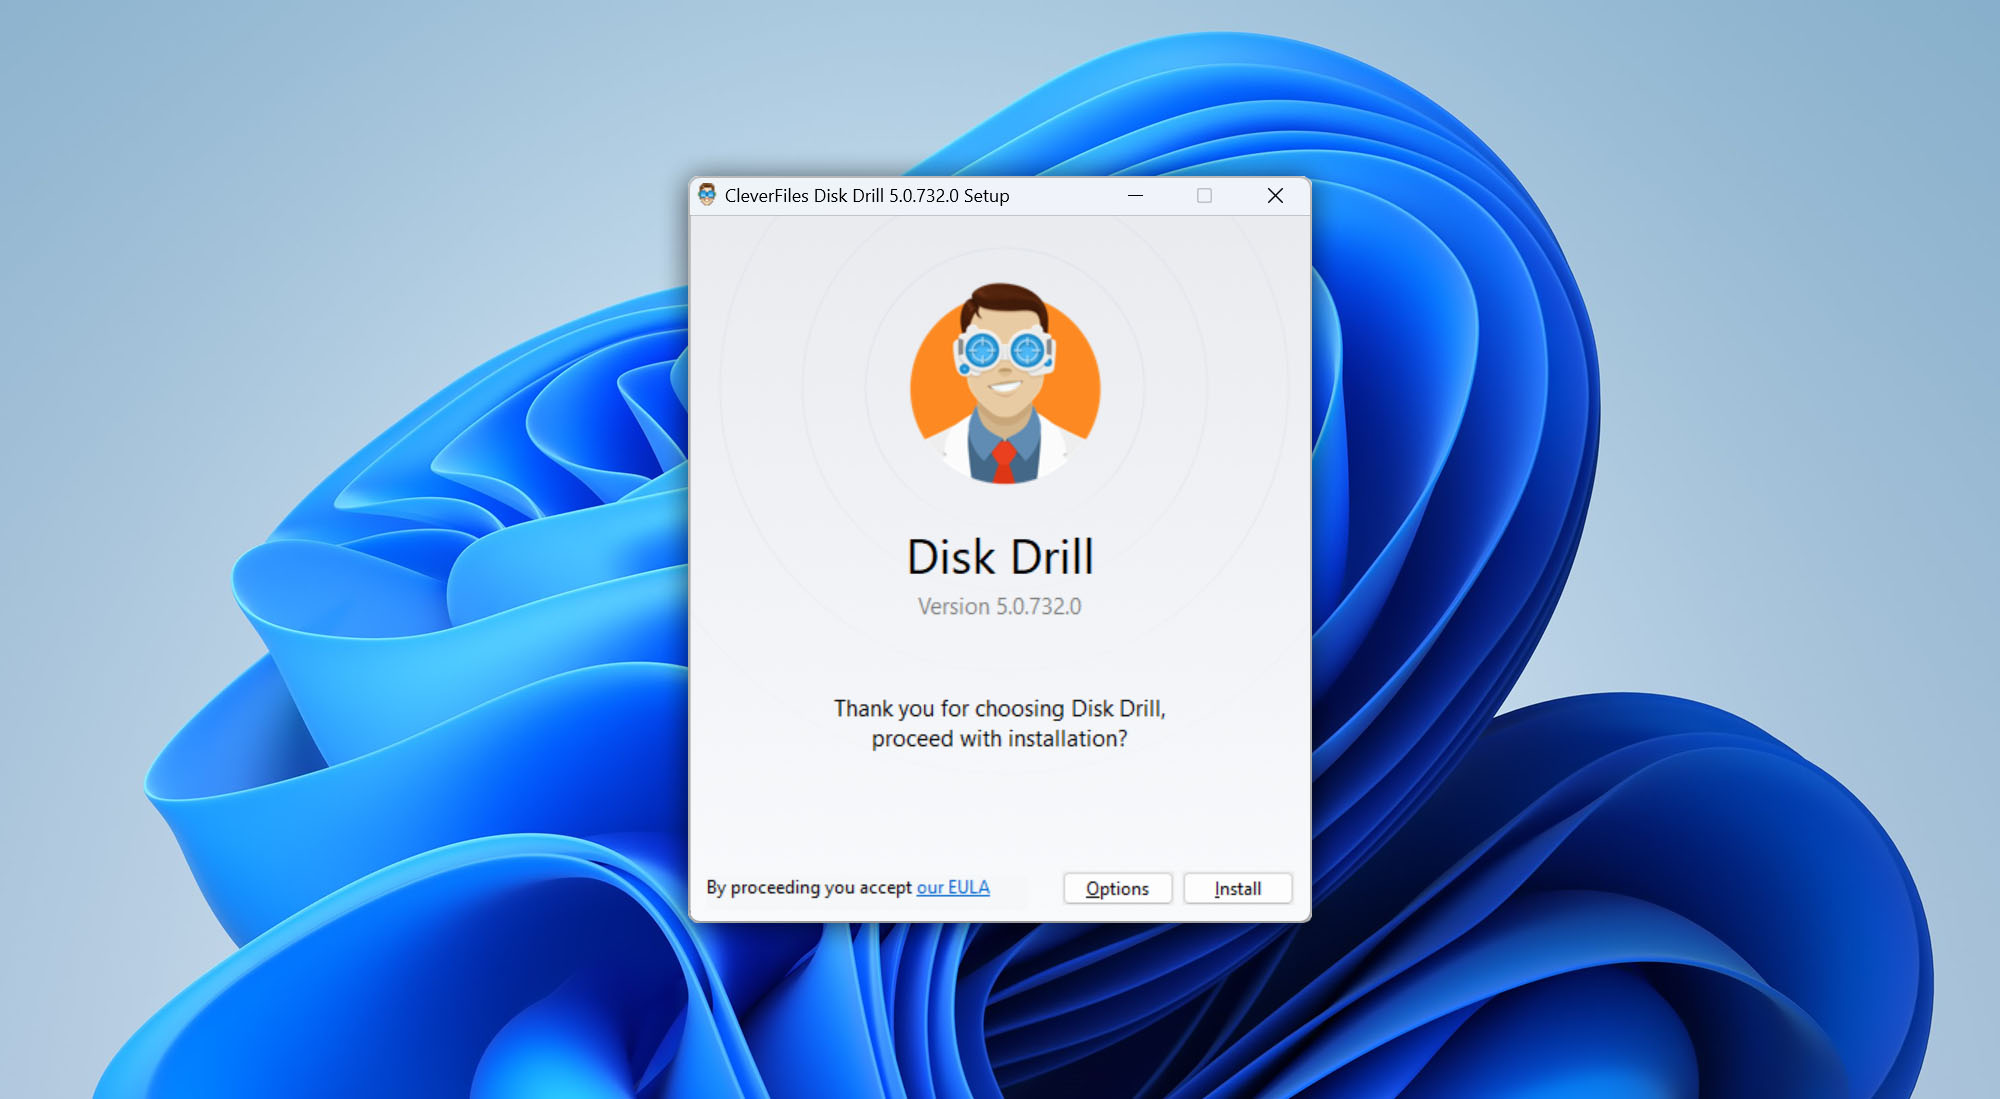 Download and install Disk Drill for Windows